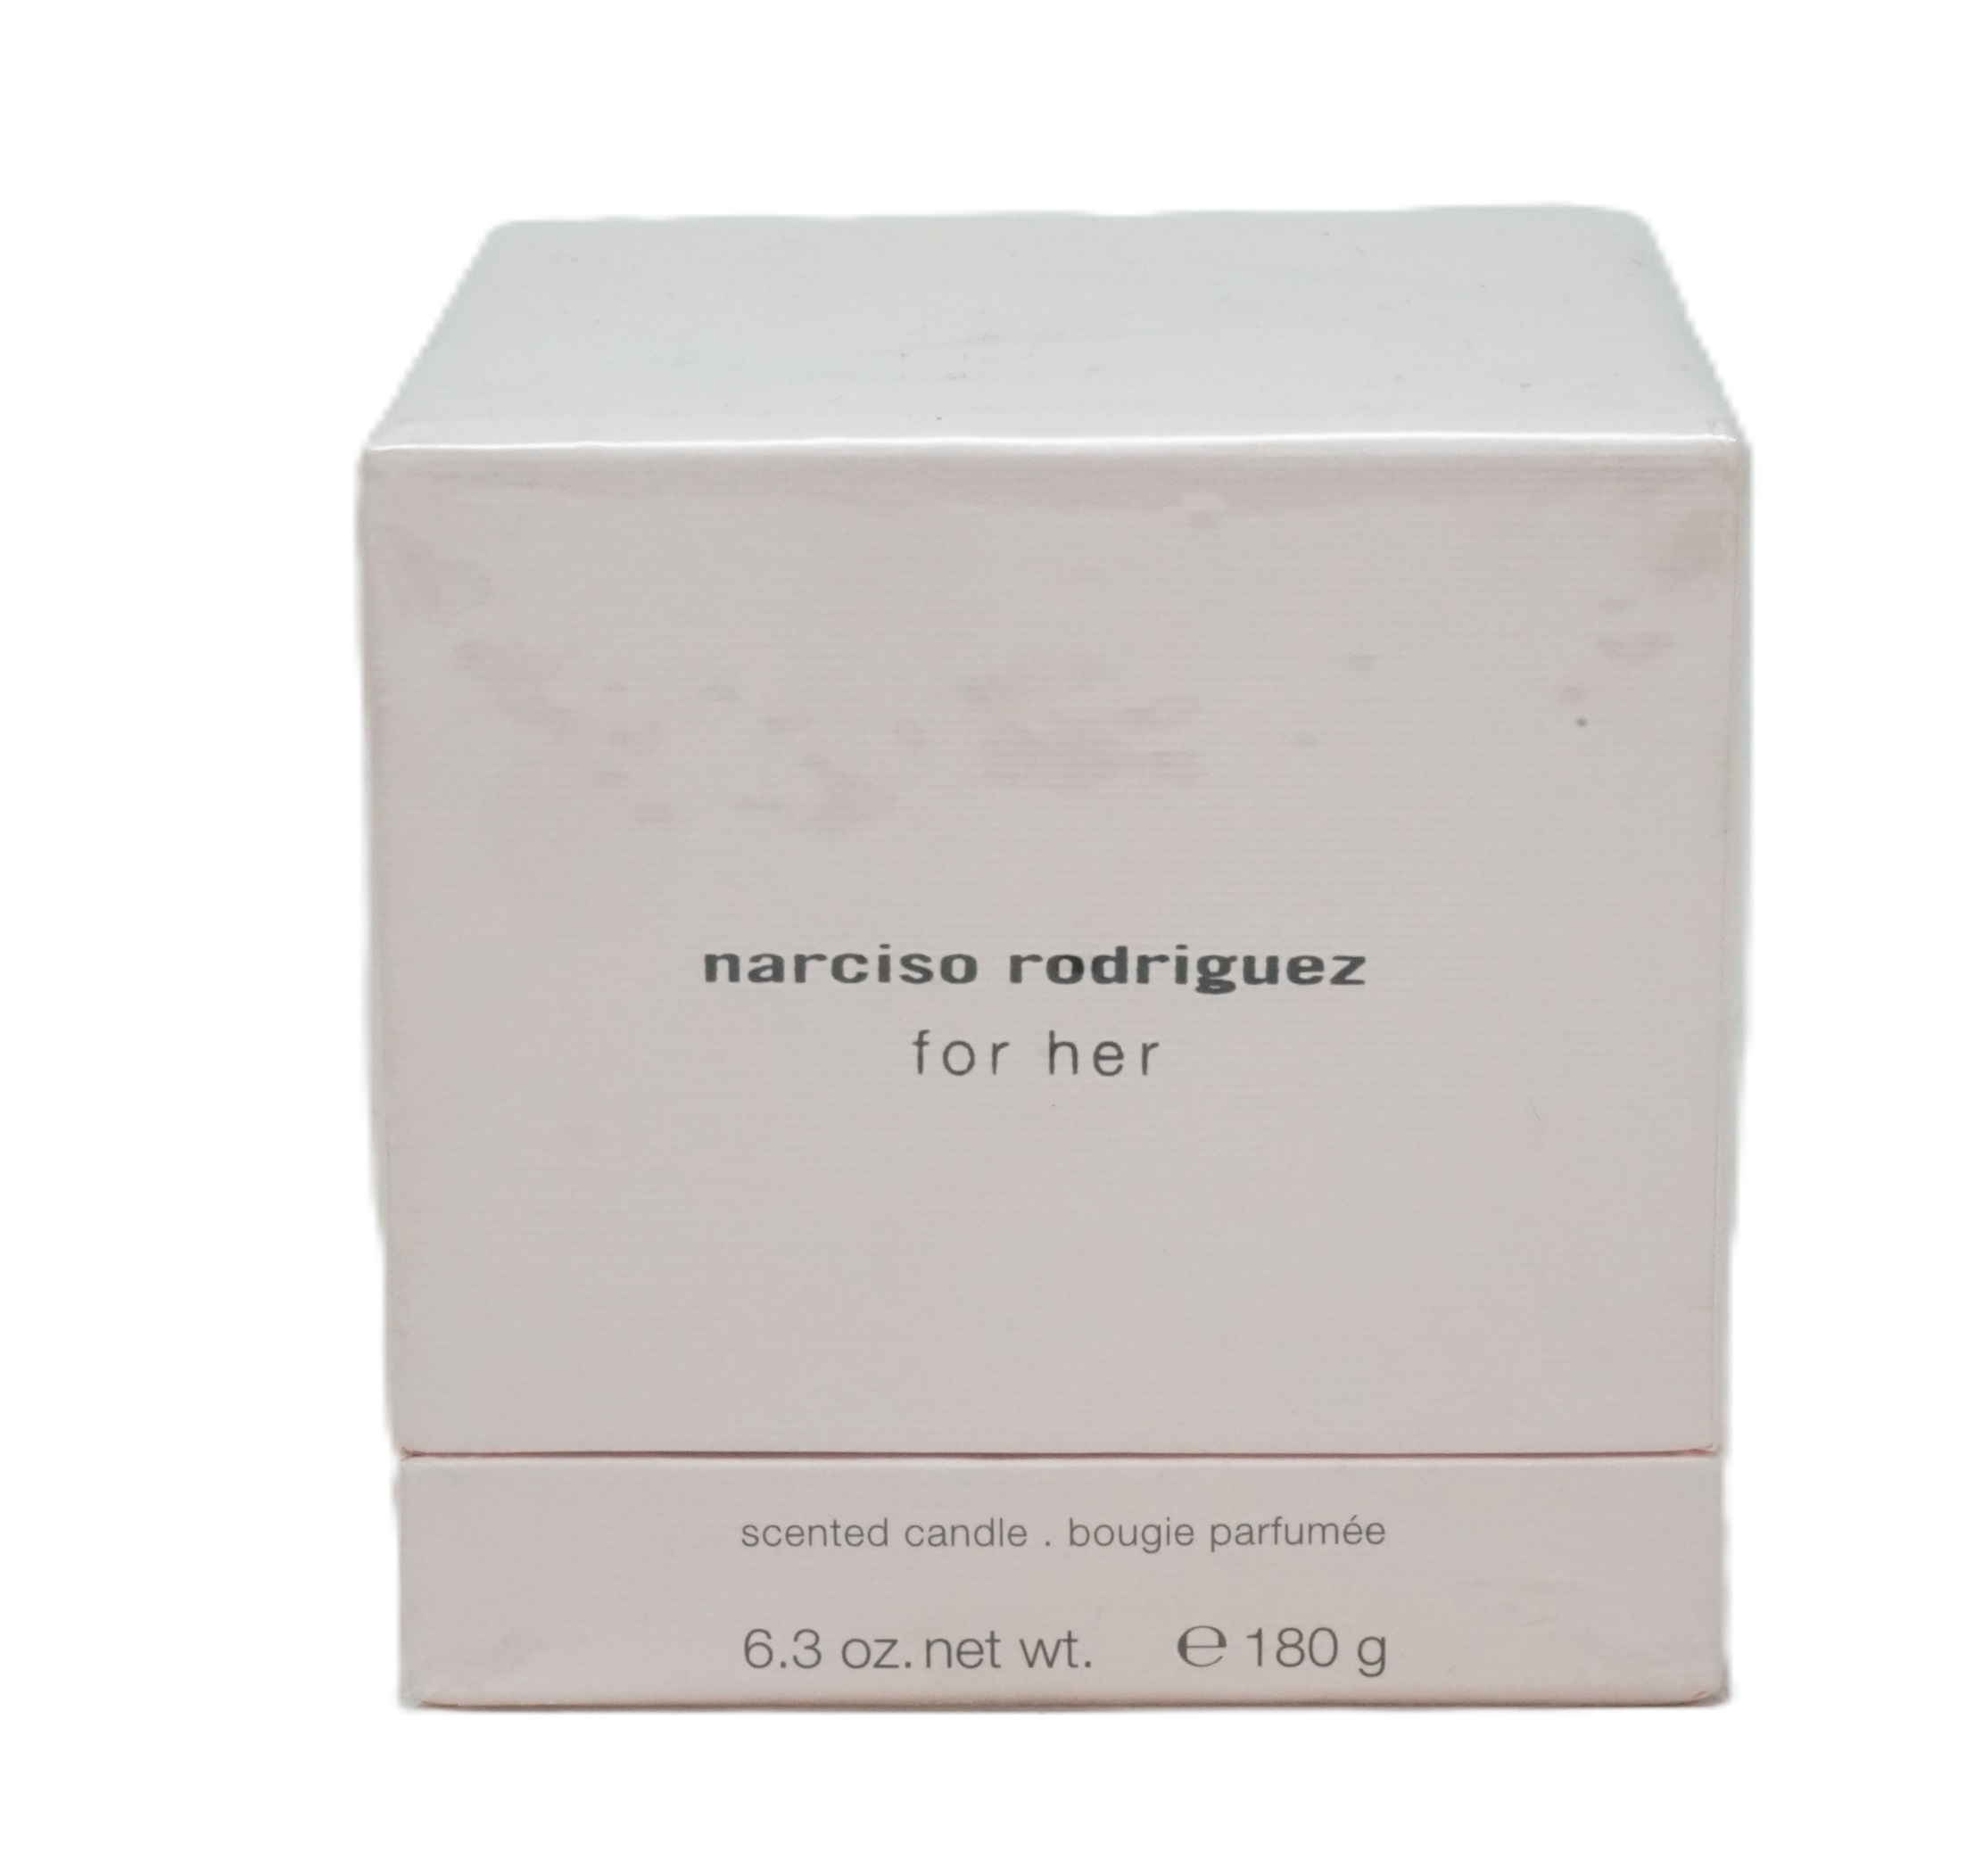 Narciso Rodriguez scented Candle for her 180g